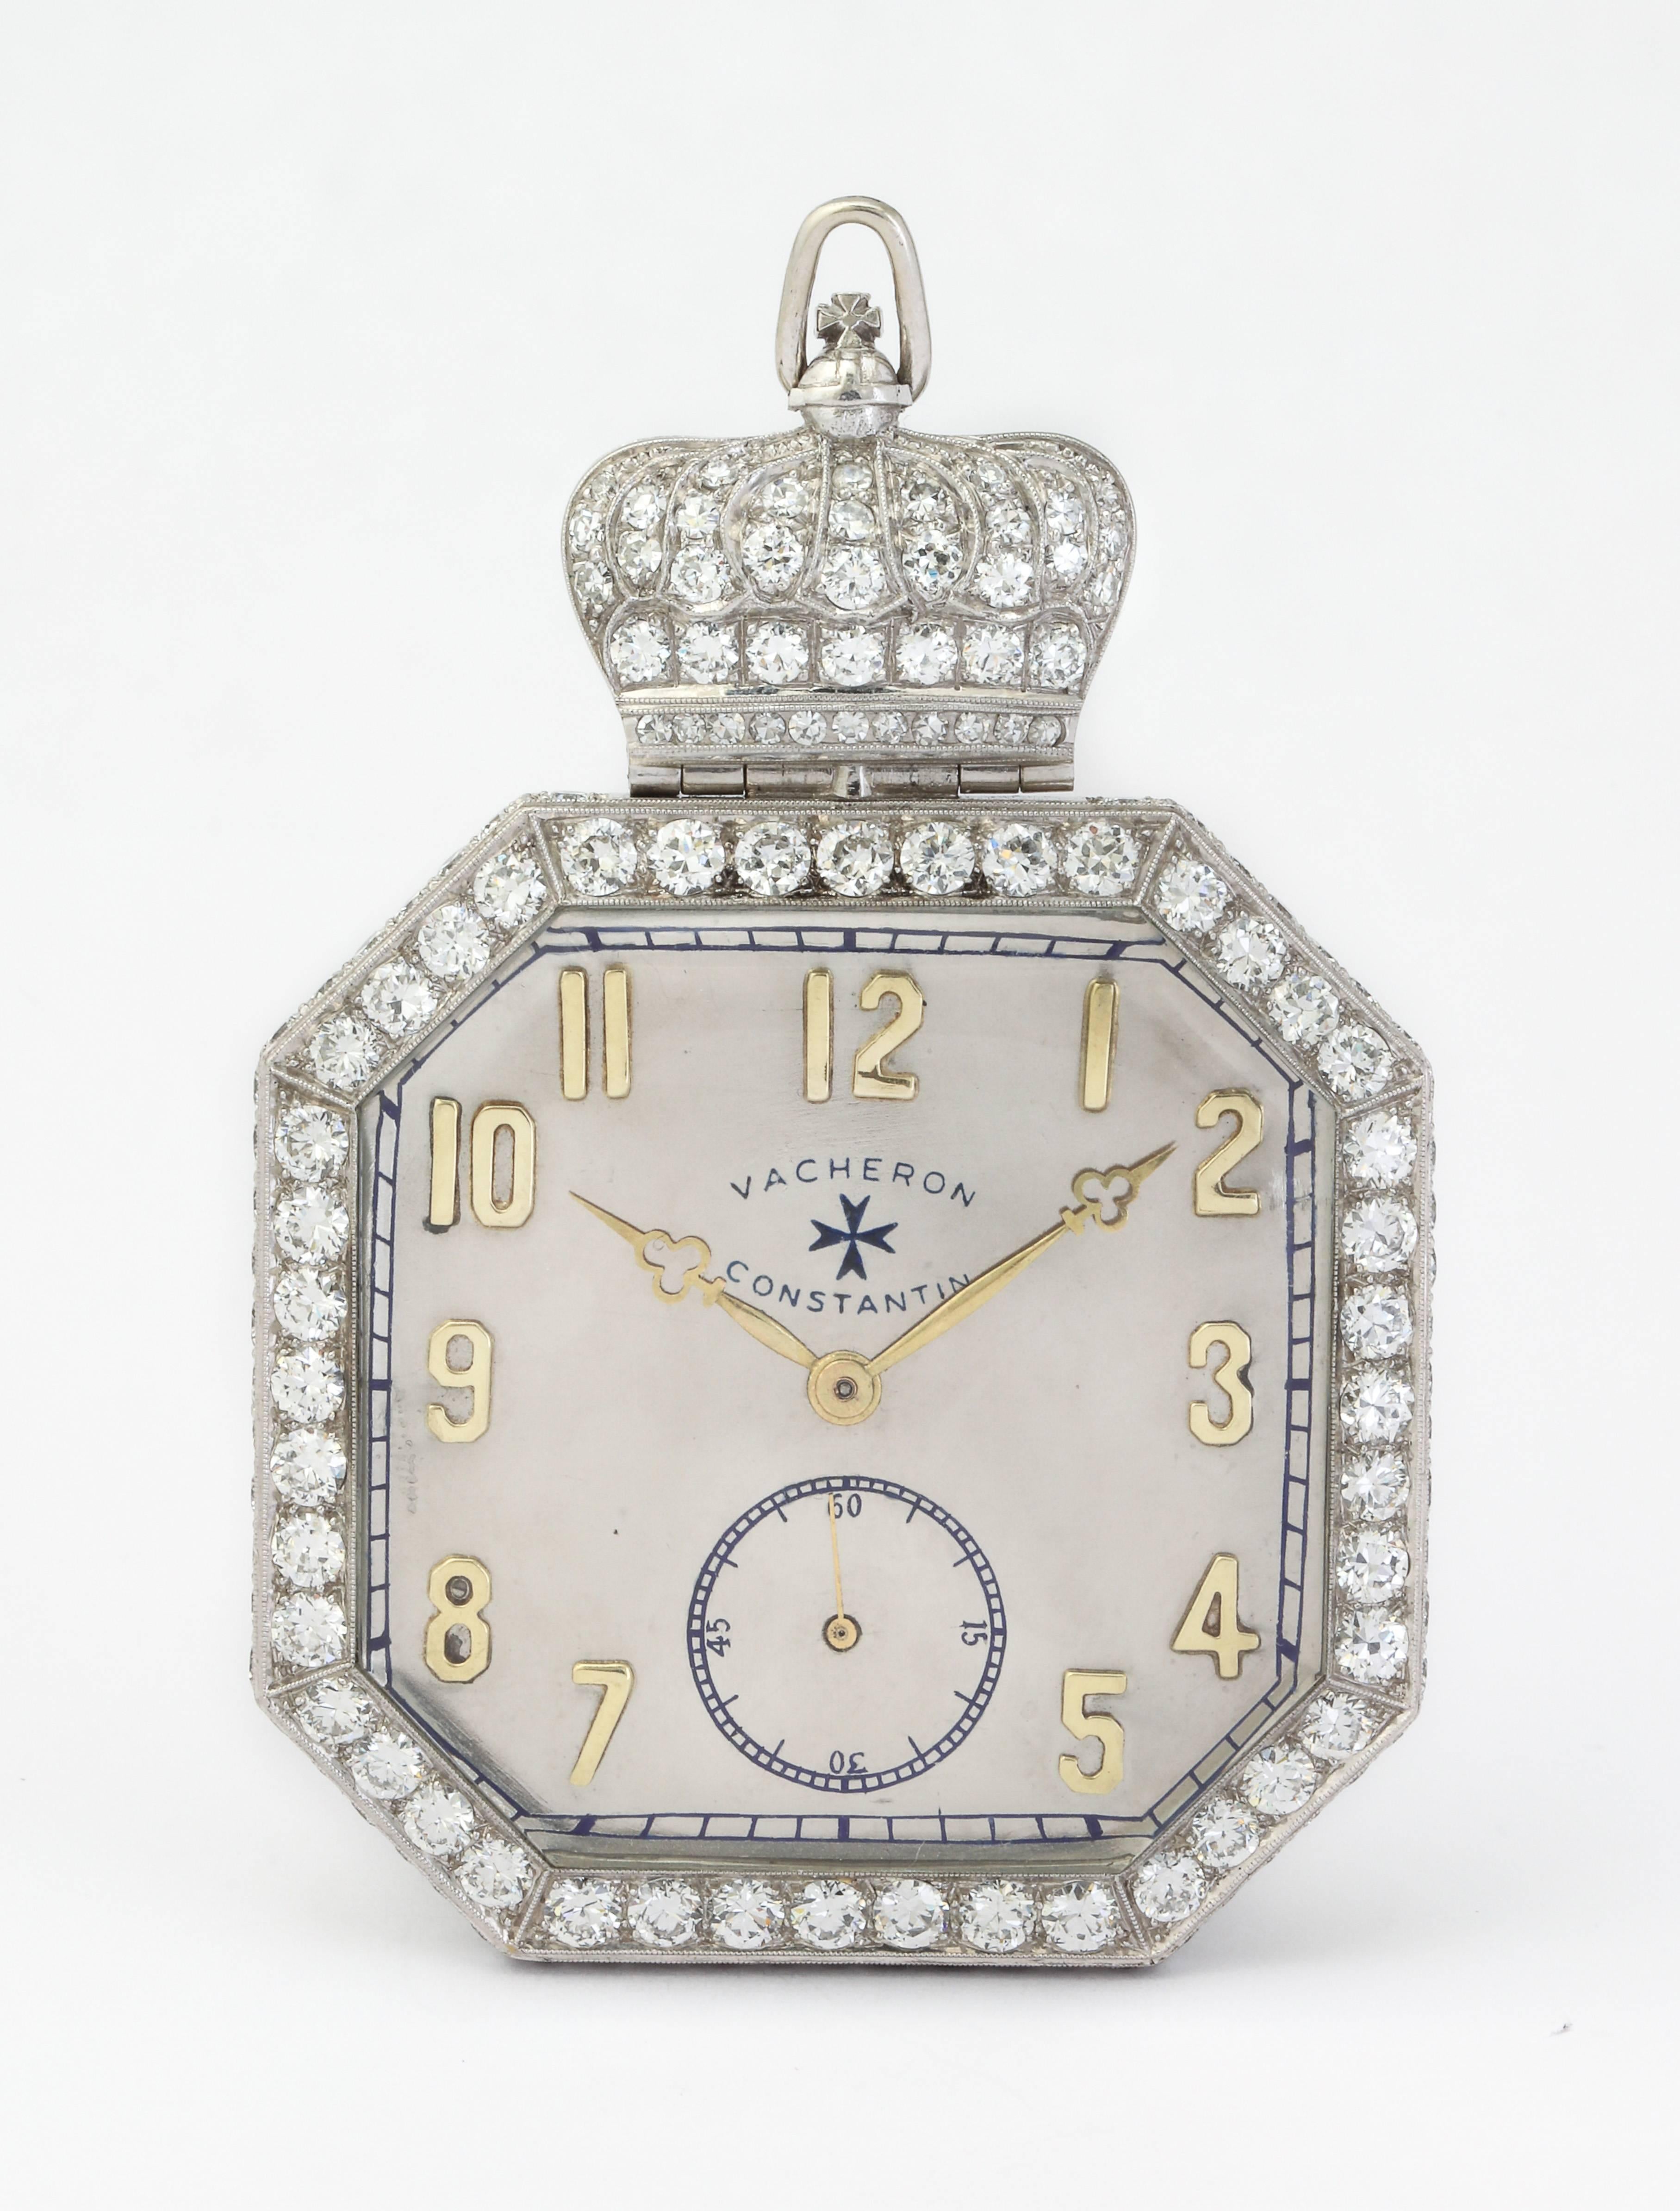 Vacheron Constantin Diamond Pocket Watch

A superbly made and very rare pocket watch with a diamond encrusted crown

Can be worn as a pendant

Made circa 1920